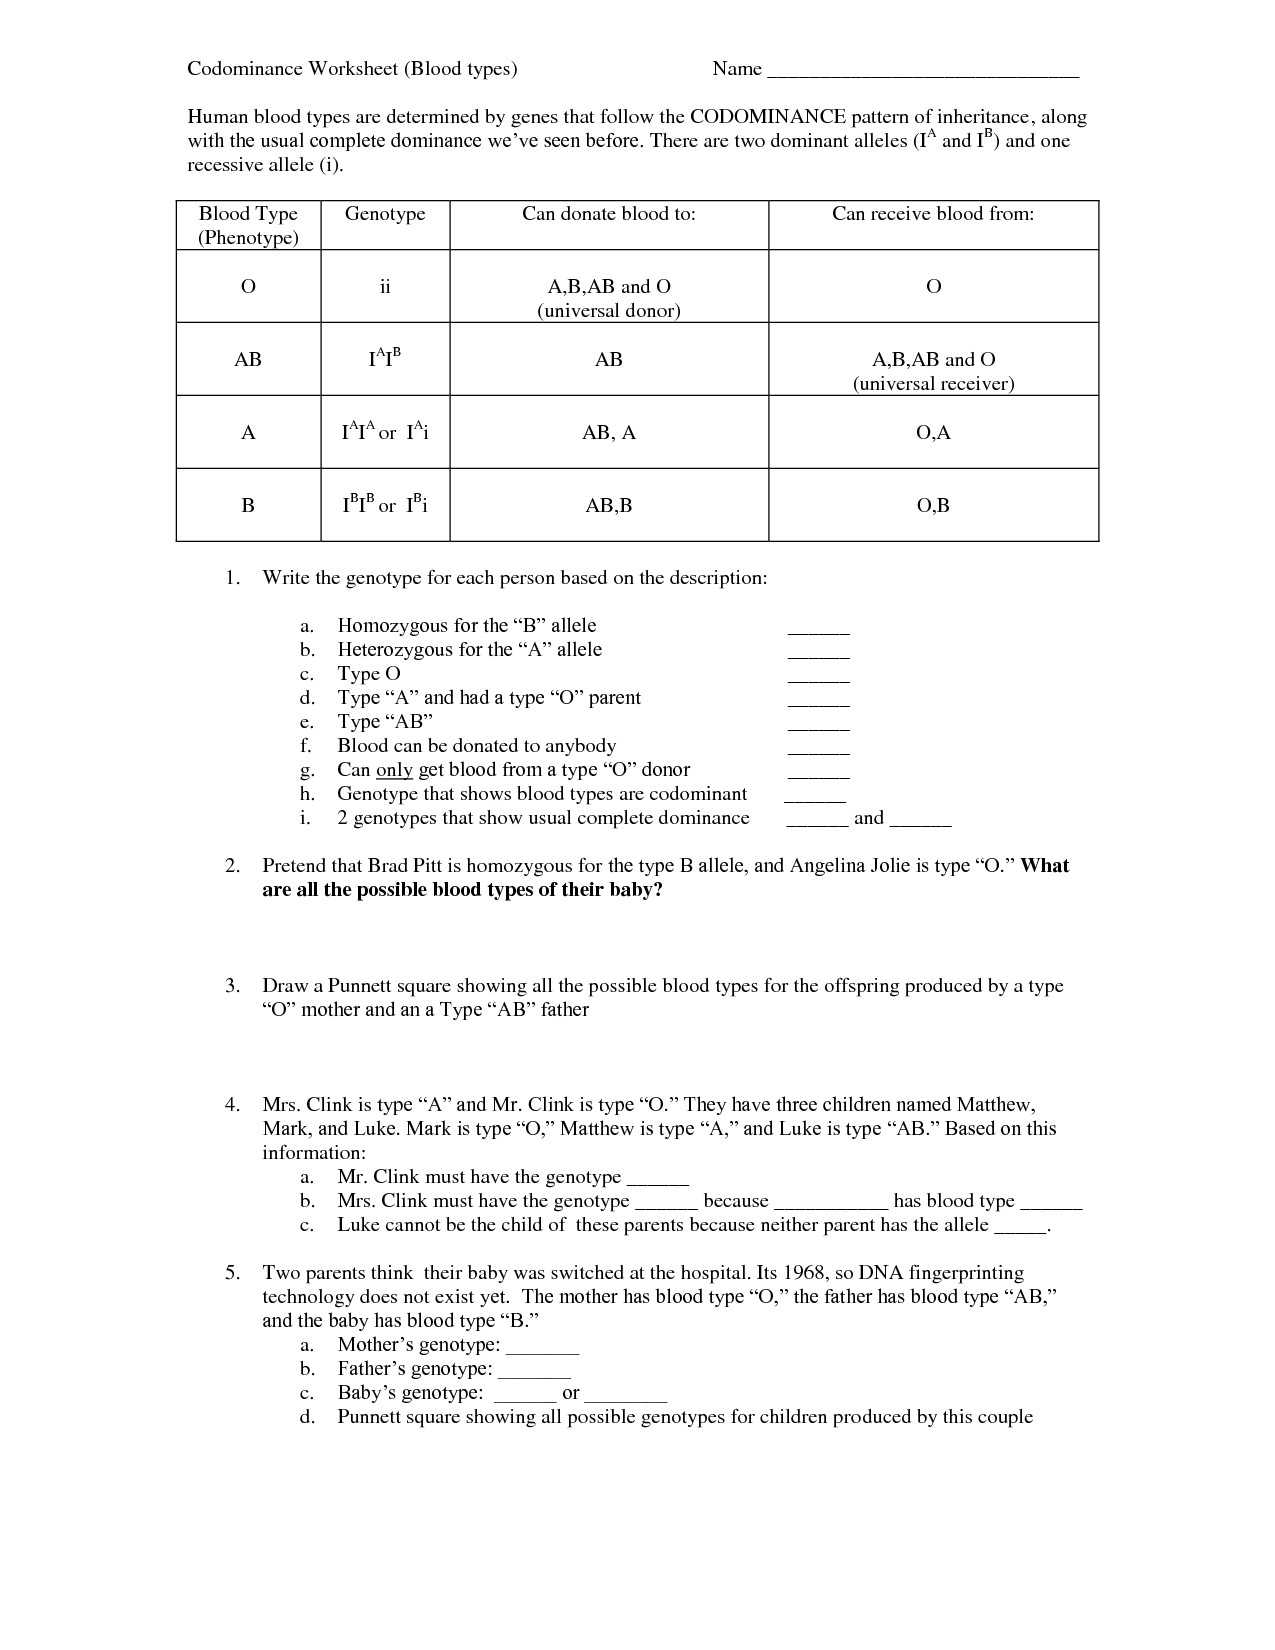 Worksheet 10 Metallic Bonds Answers Also Elements and their Properties Worksheet Answers Fresh Periodic Table